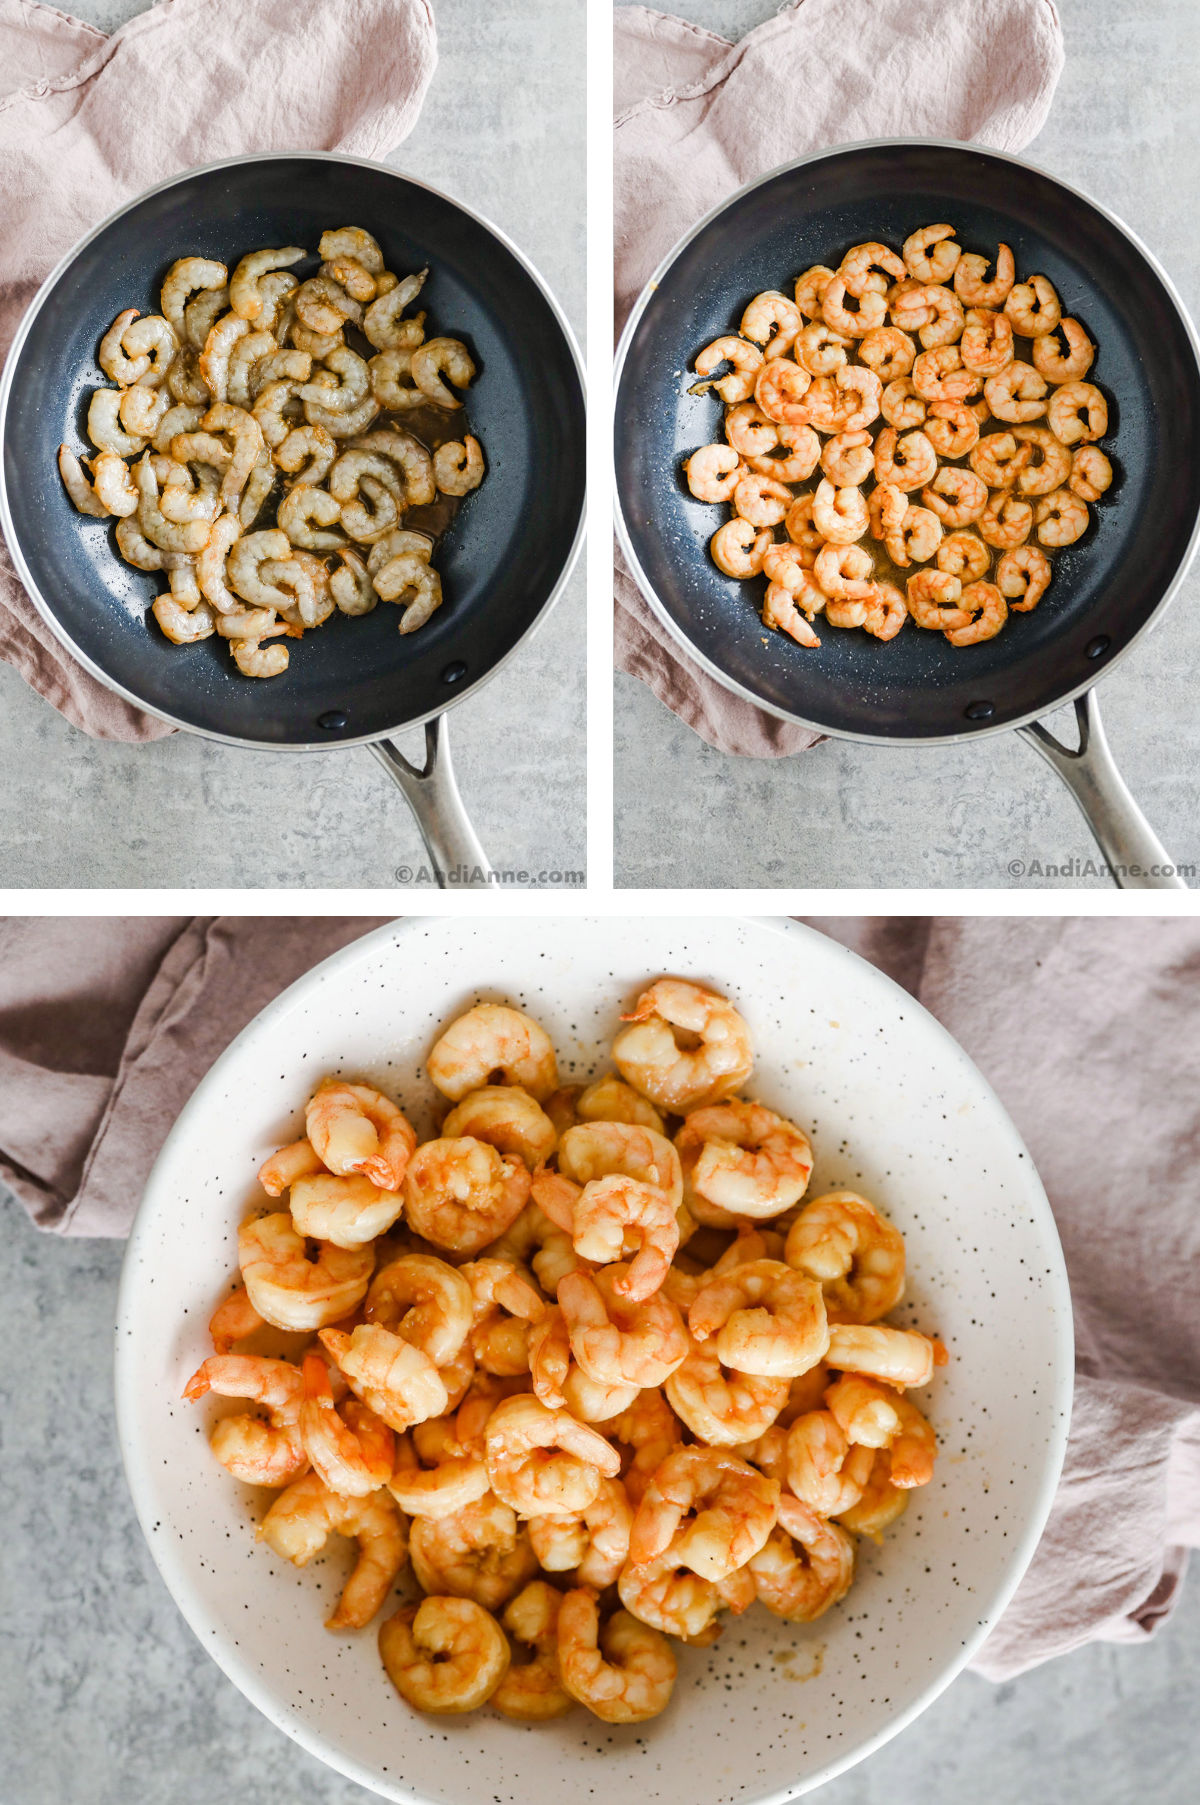 Three overhead images in one: 1. Raw shrimp in frying pan. 2. Shrimp is cooked in frying pan. 3. Closeup of cooked shrimp in a white bowl. 